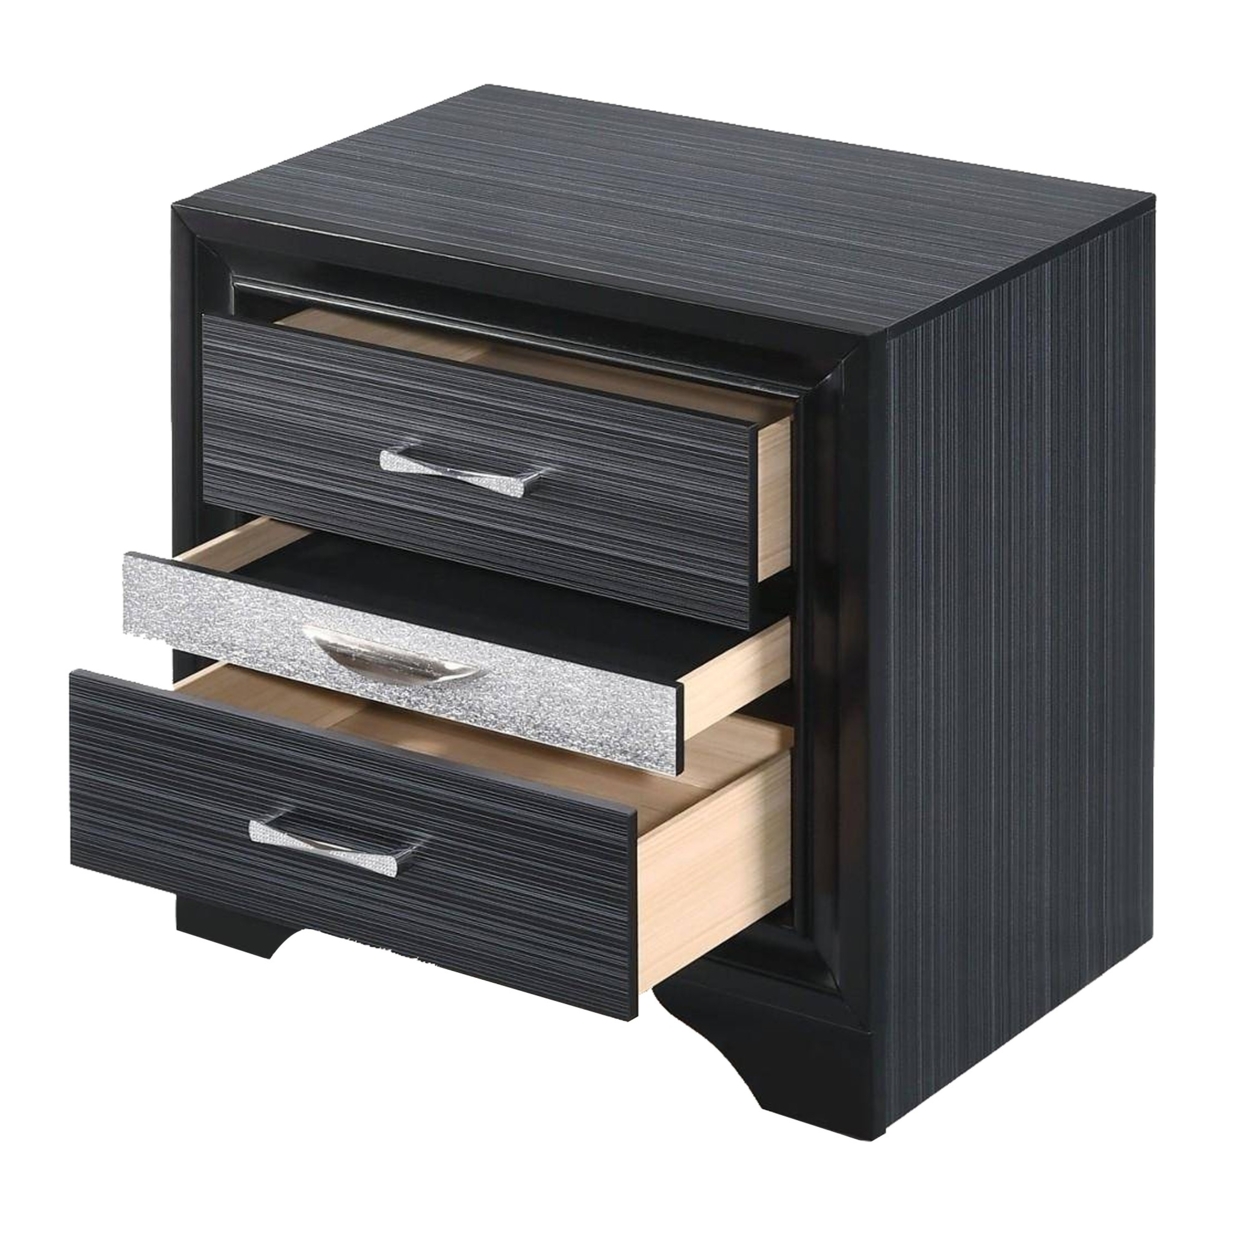 Two Tone Wooden Nightstand With Three Drawers, Black And Silver- Saltoro Sherpi